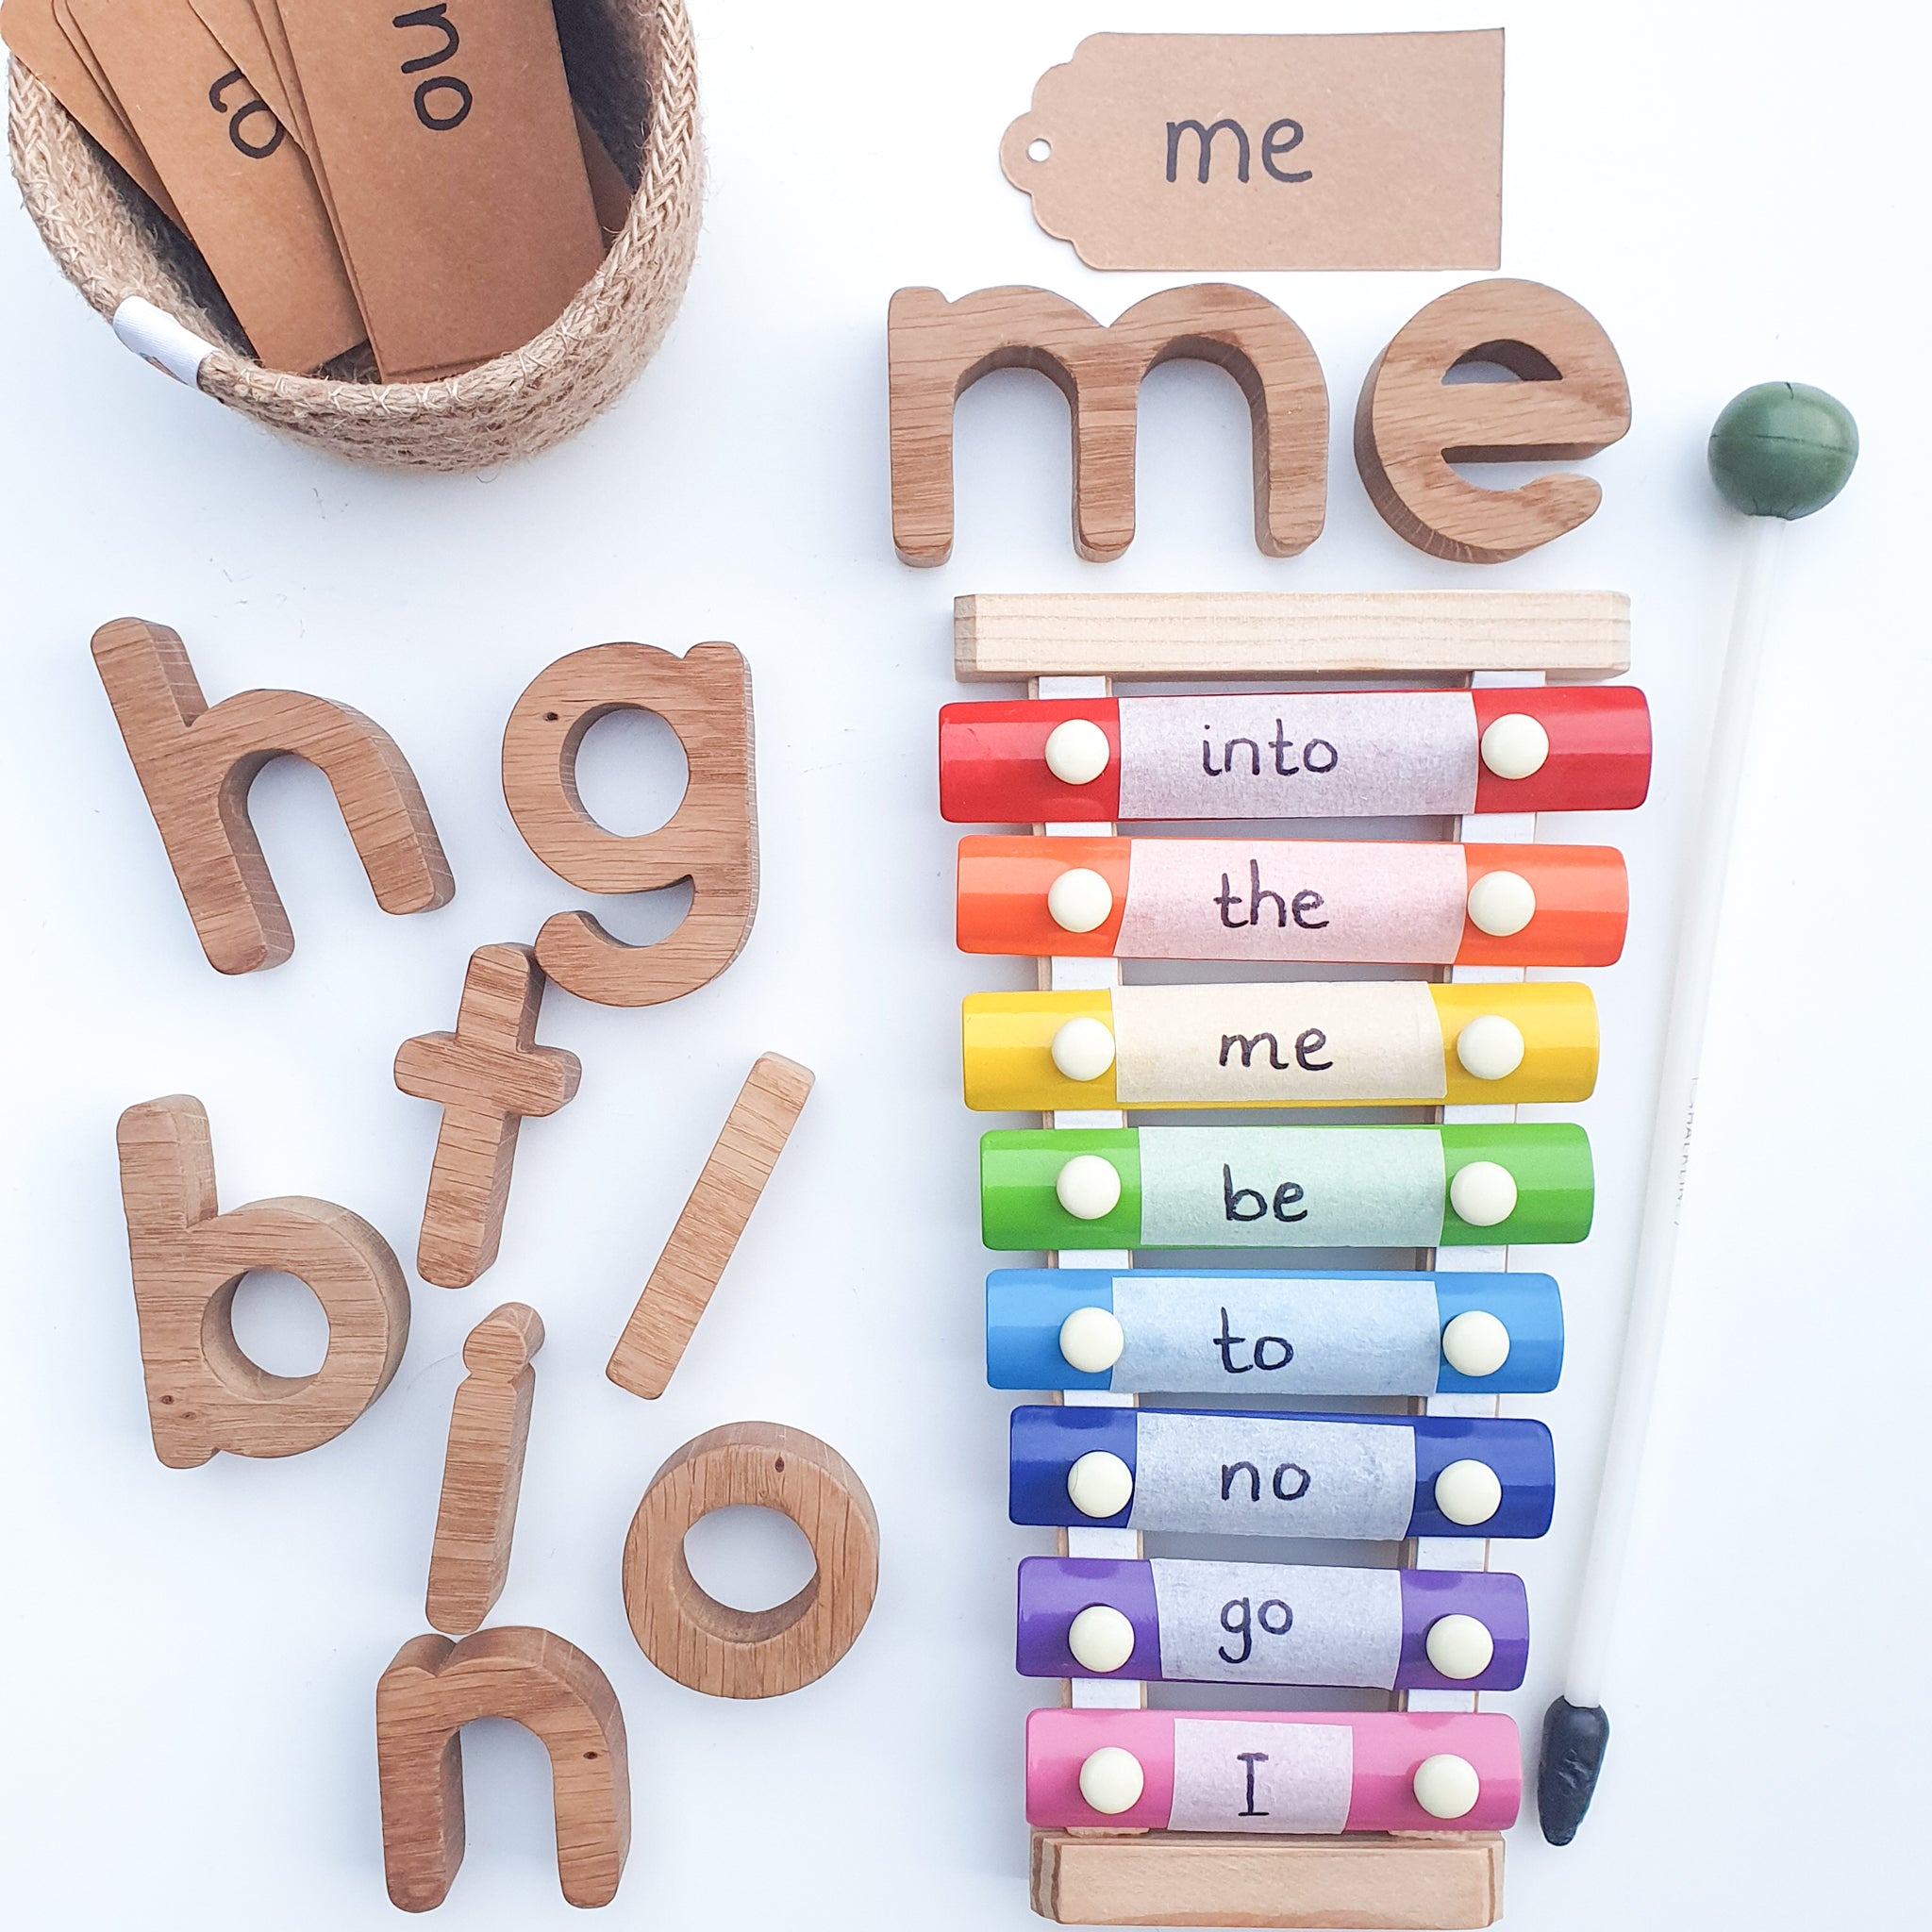 handmade wooden oak alphabet letters toy being used to learn phonics with the use of a xylophone.